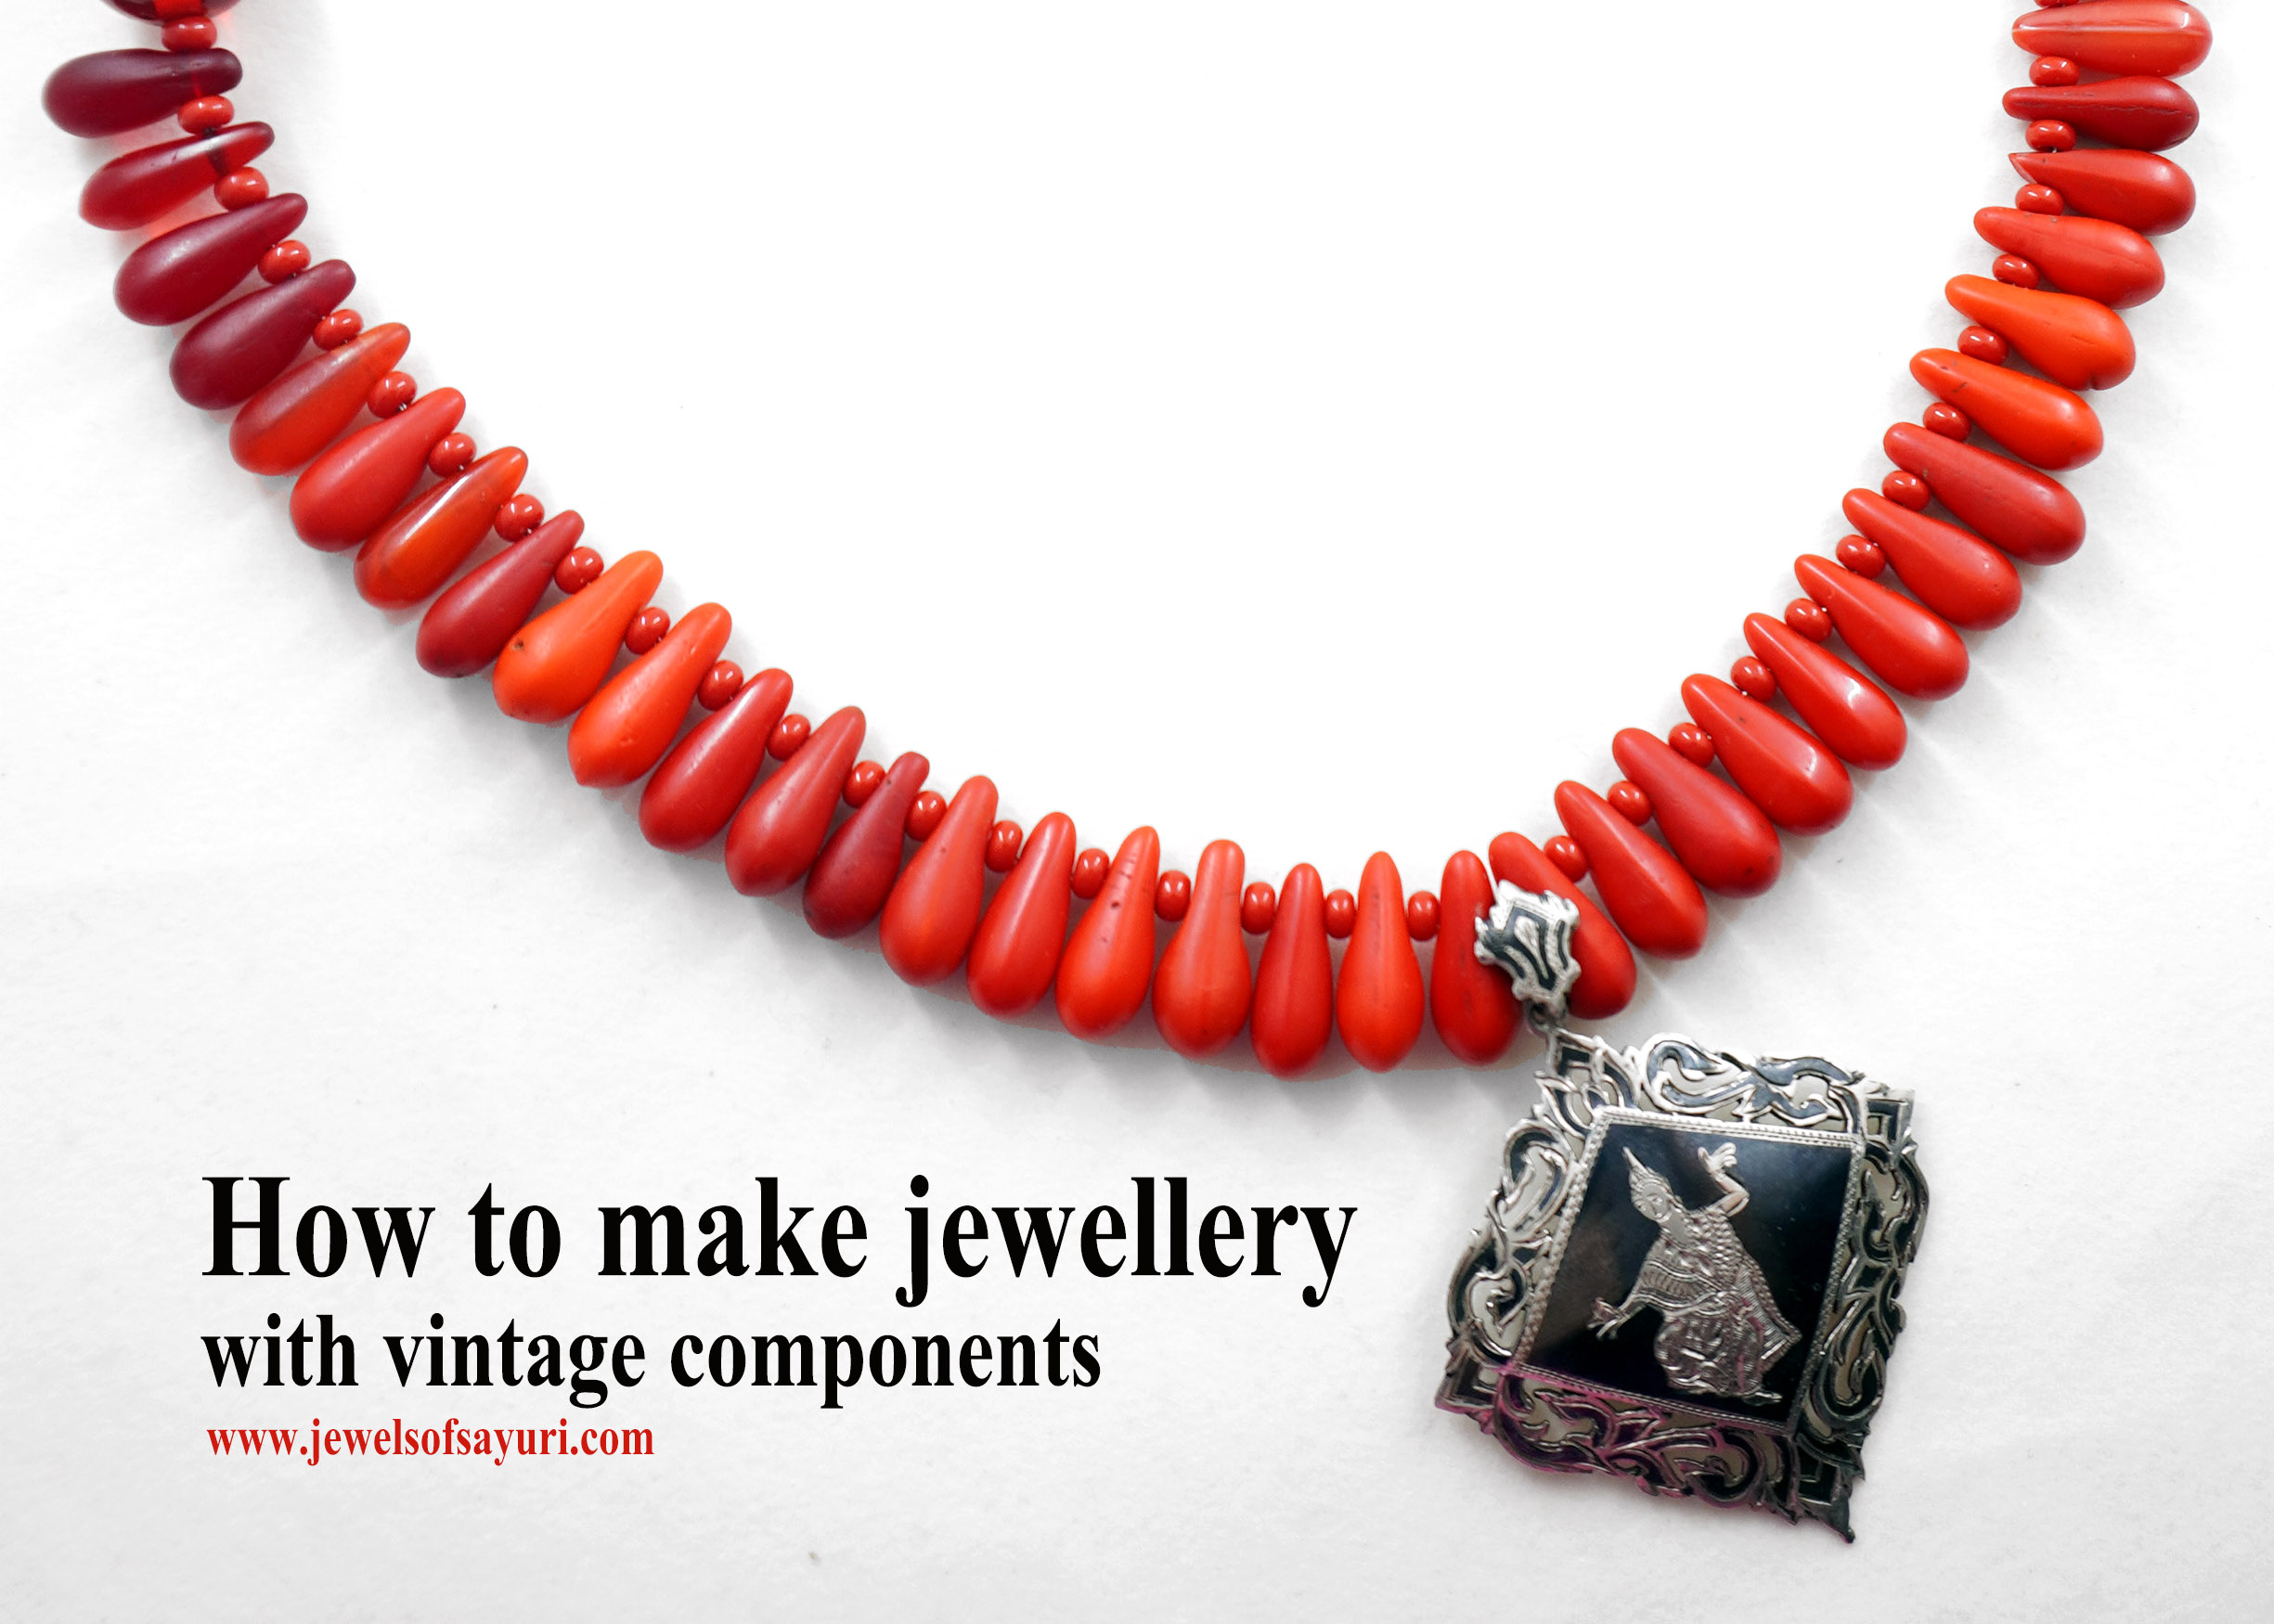 How to make jewellery with vintage components